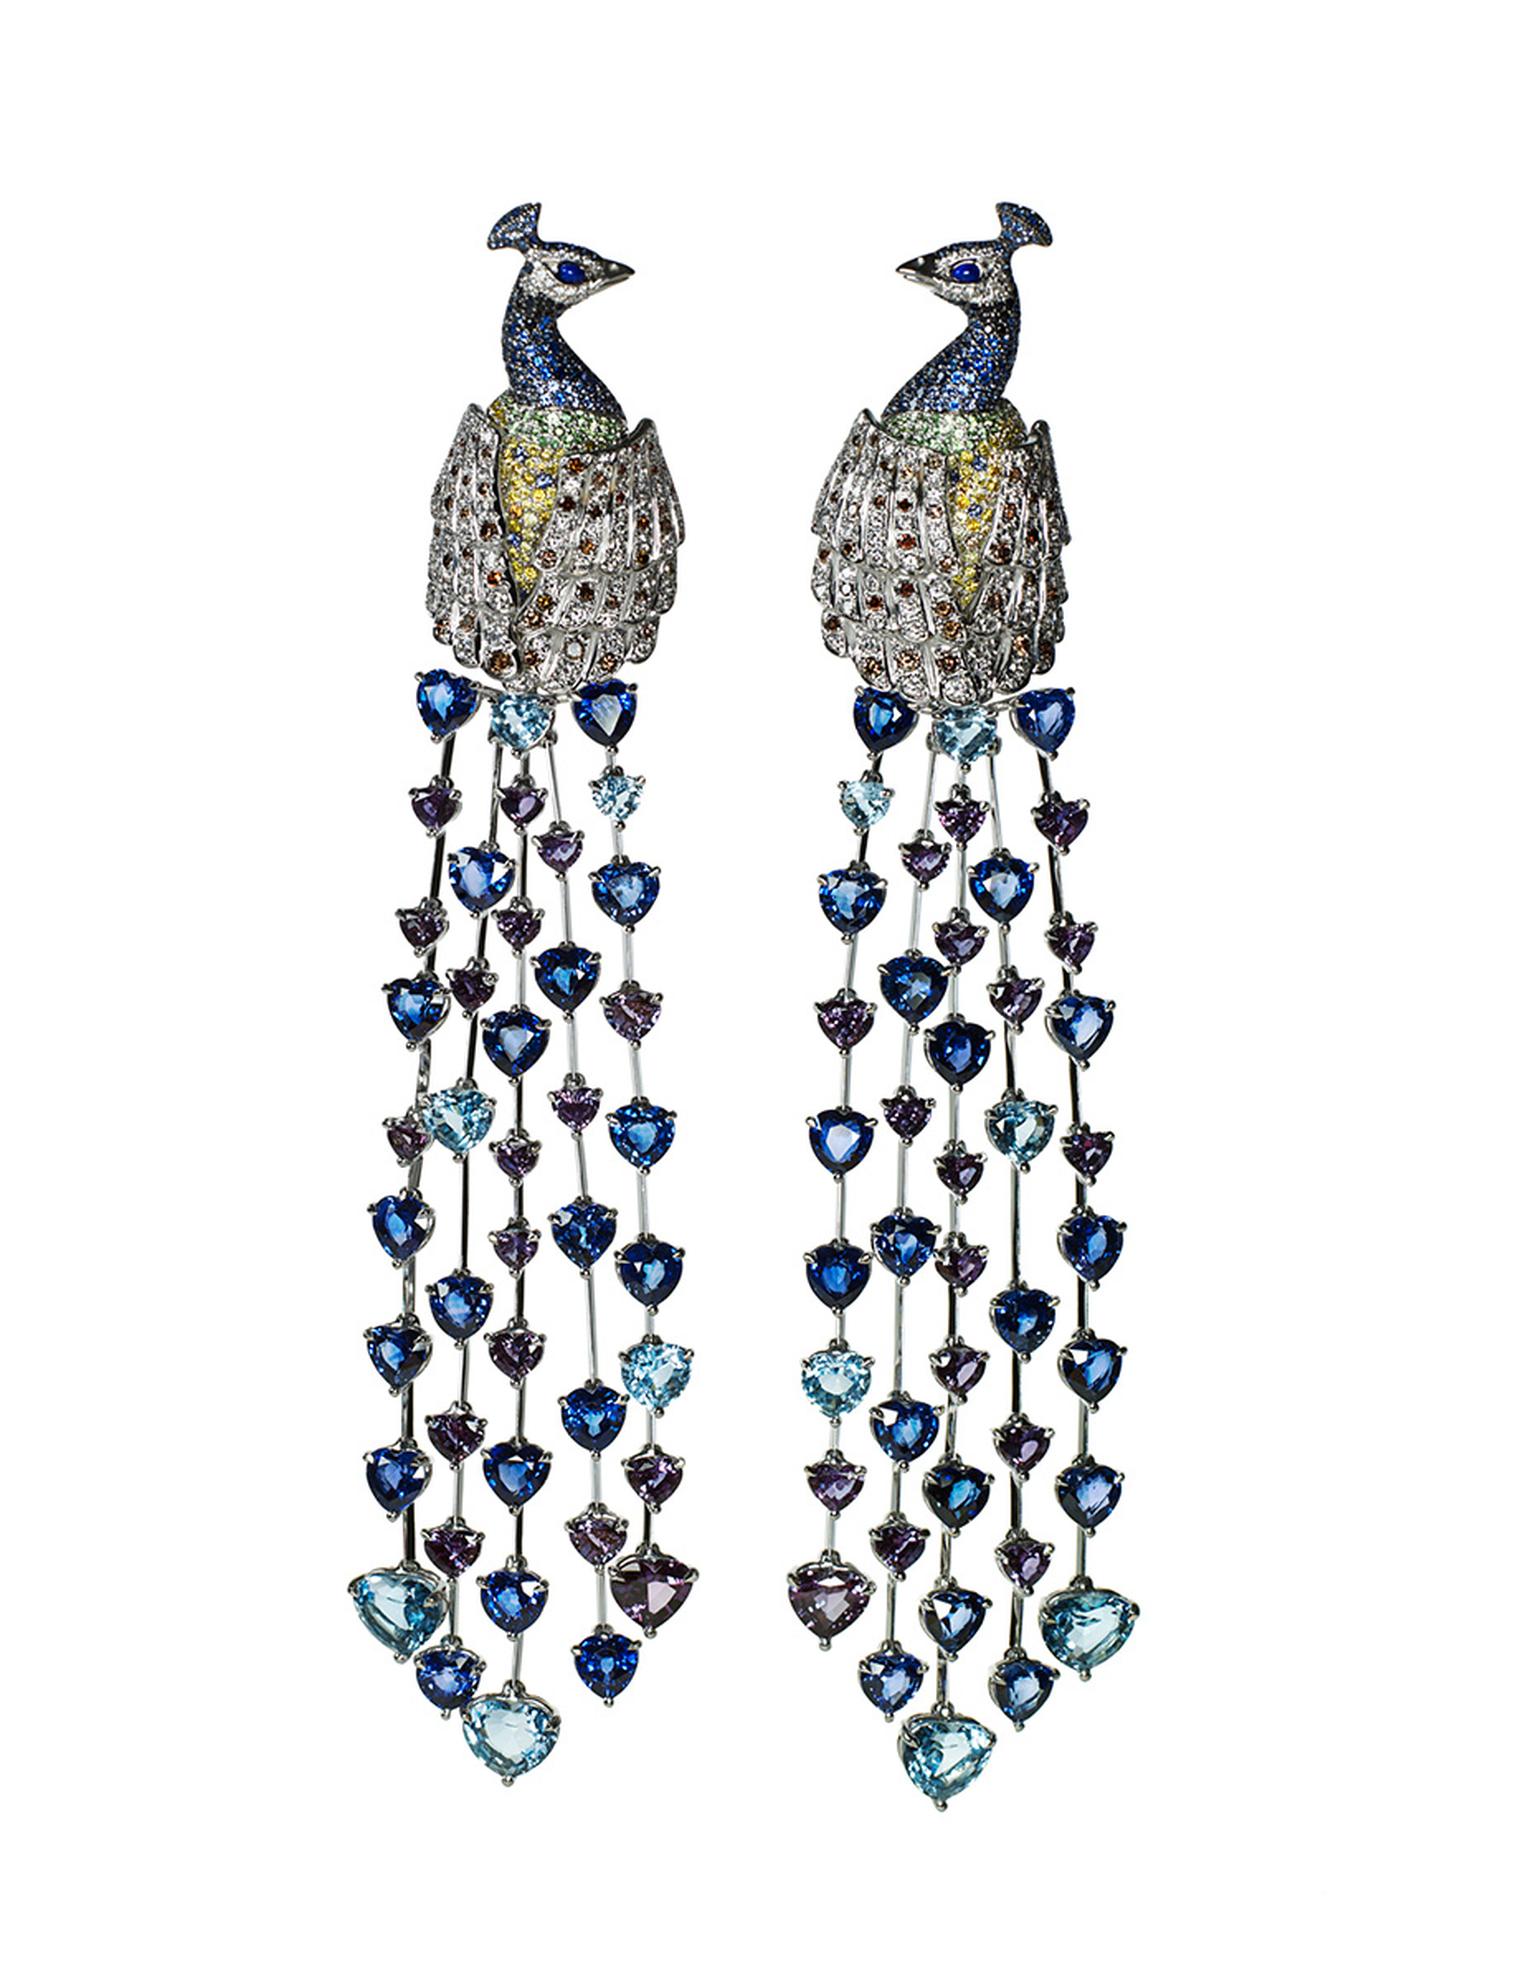 Chopard Animal World An Immortal Peacock earrings featuring heart-shaped sapphire and alexandrite tail feathers